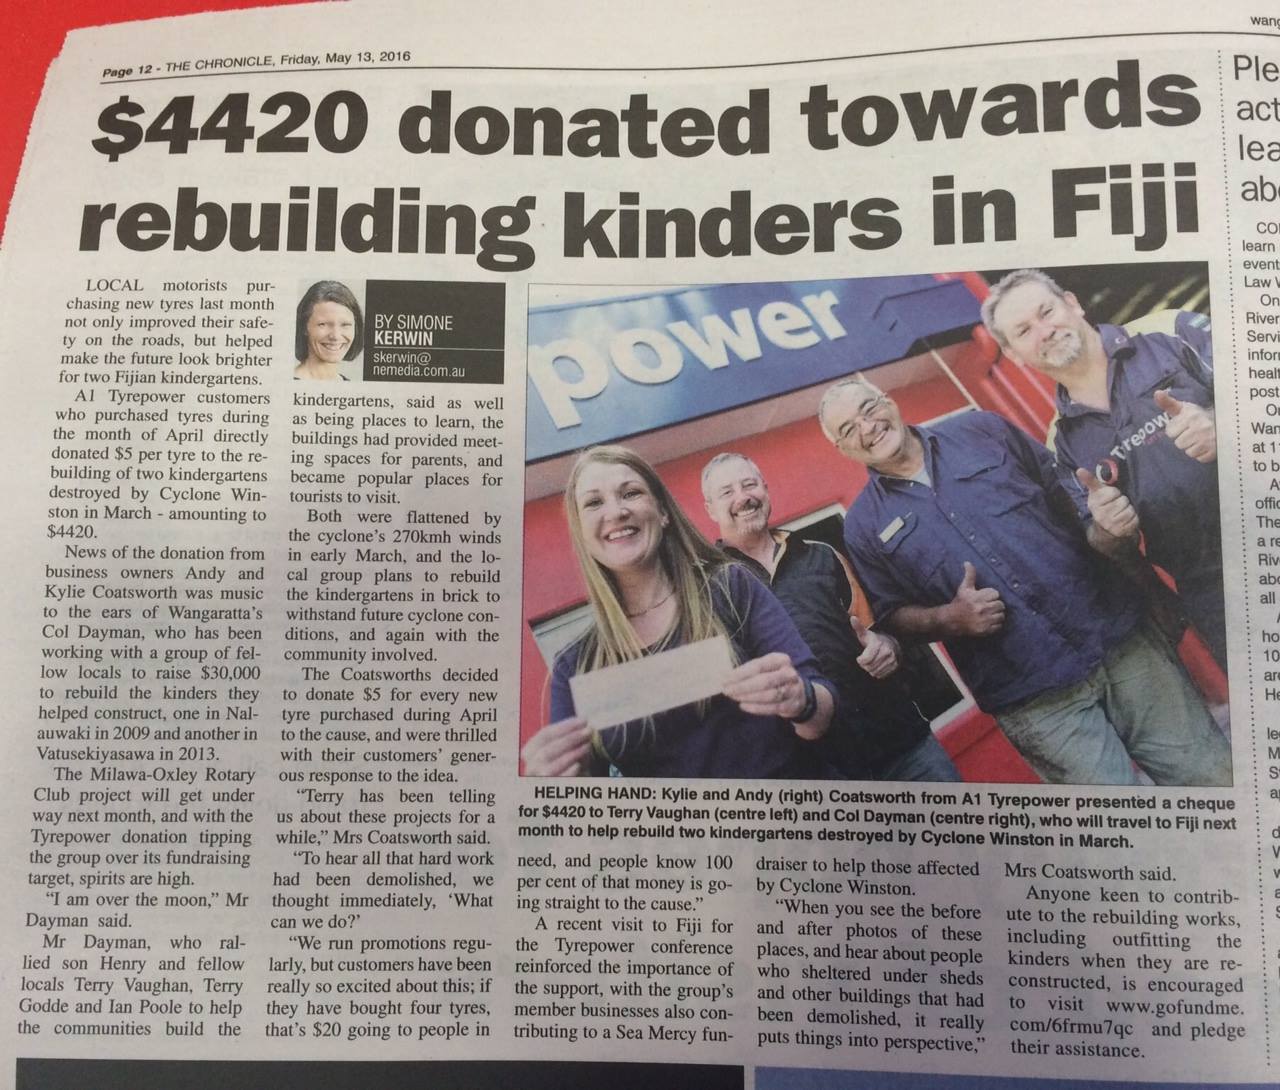 A1 Tyrepower raises $4420 to rebuild two kindergartens in Fiji that were destroyed by Cyclone Winston cover image